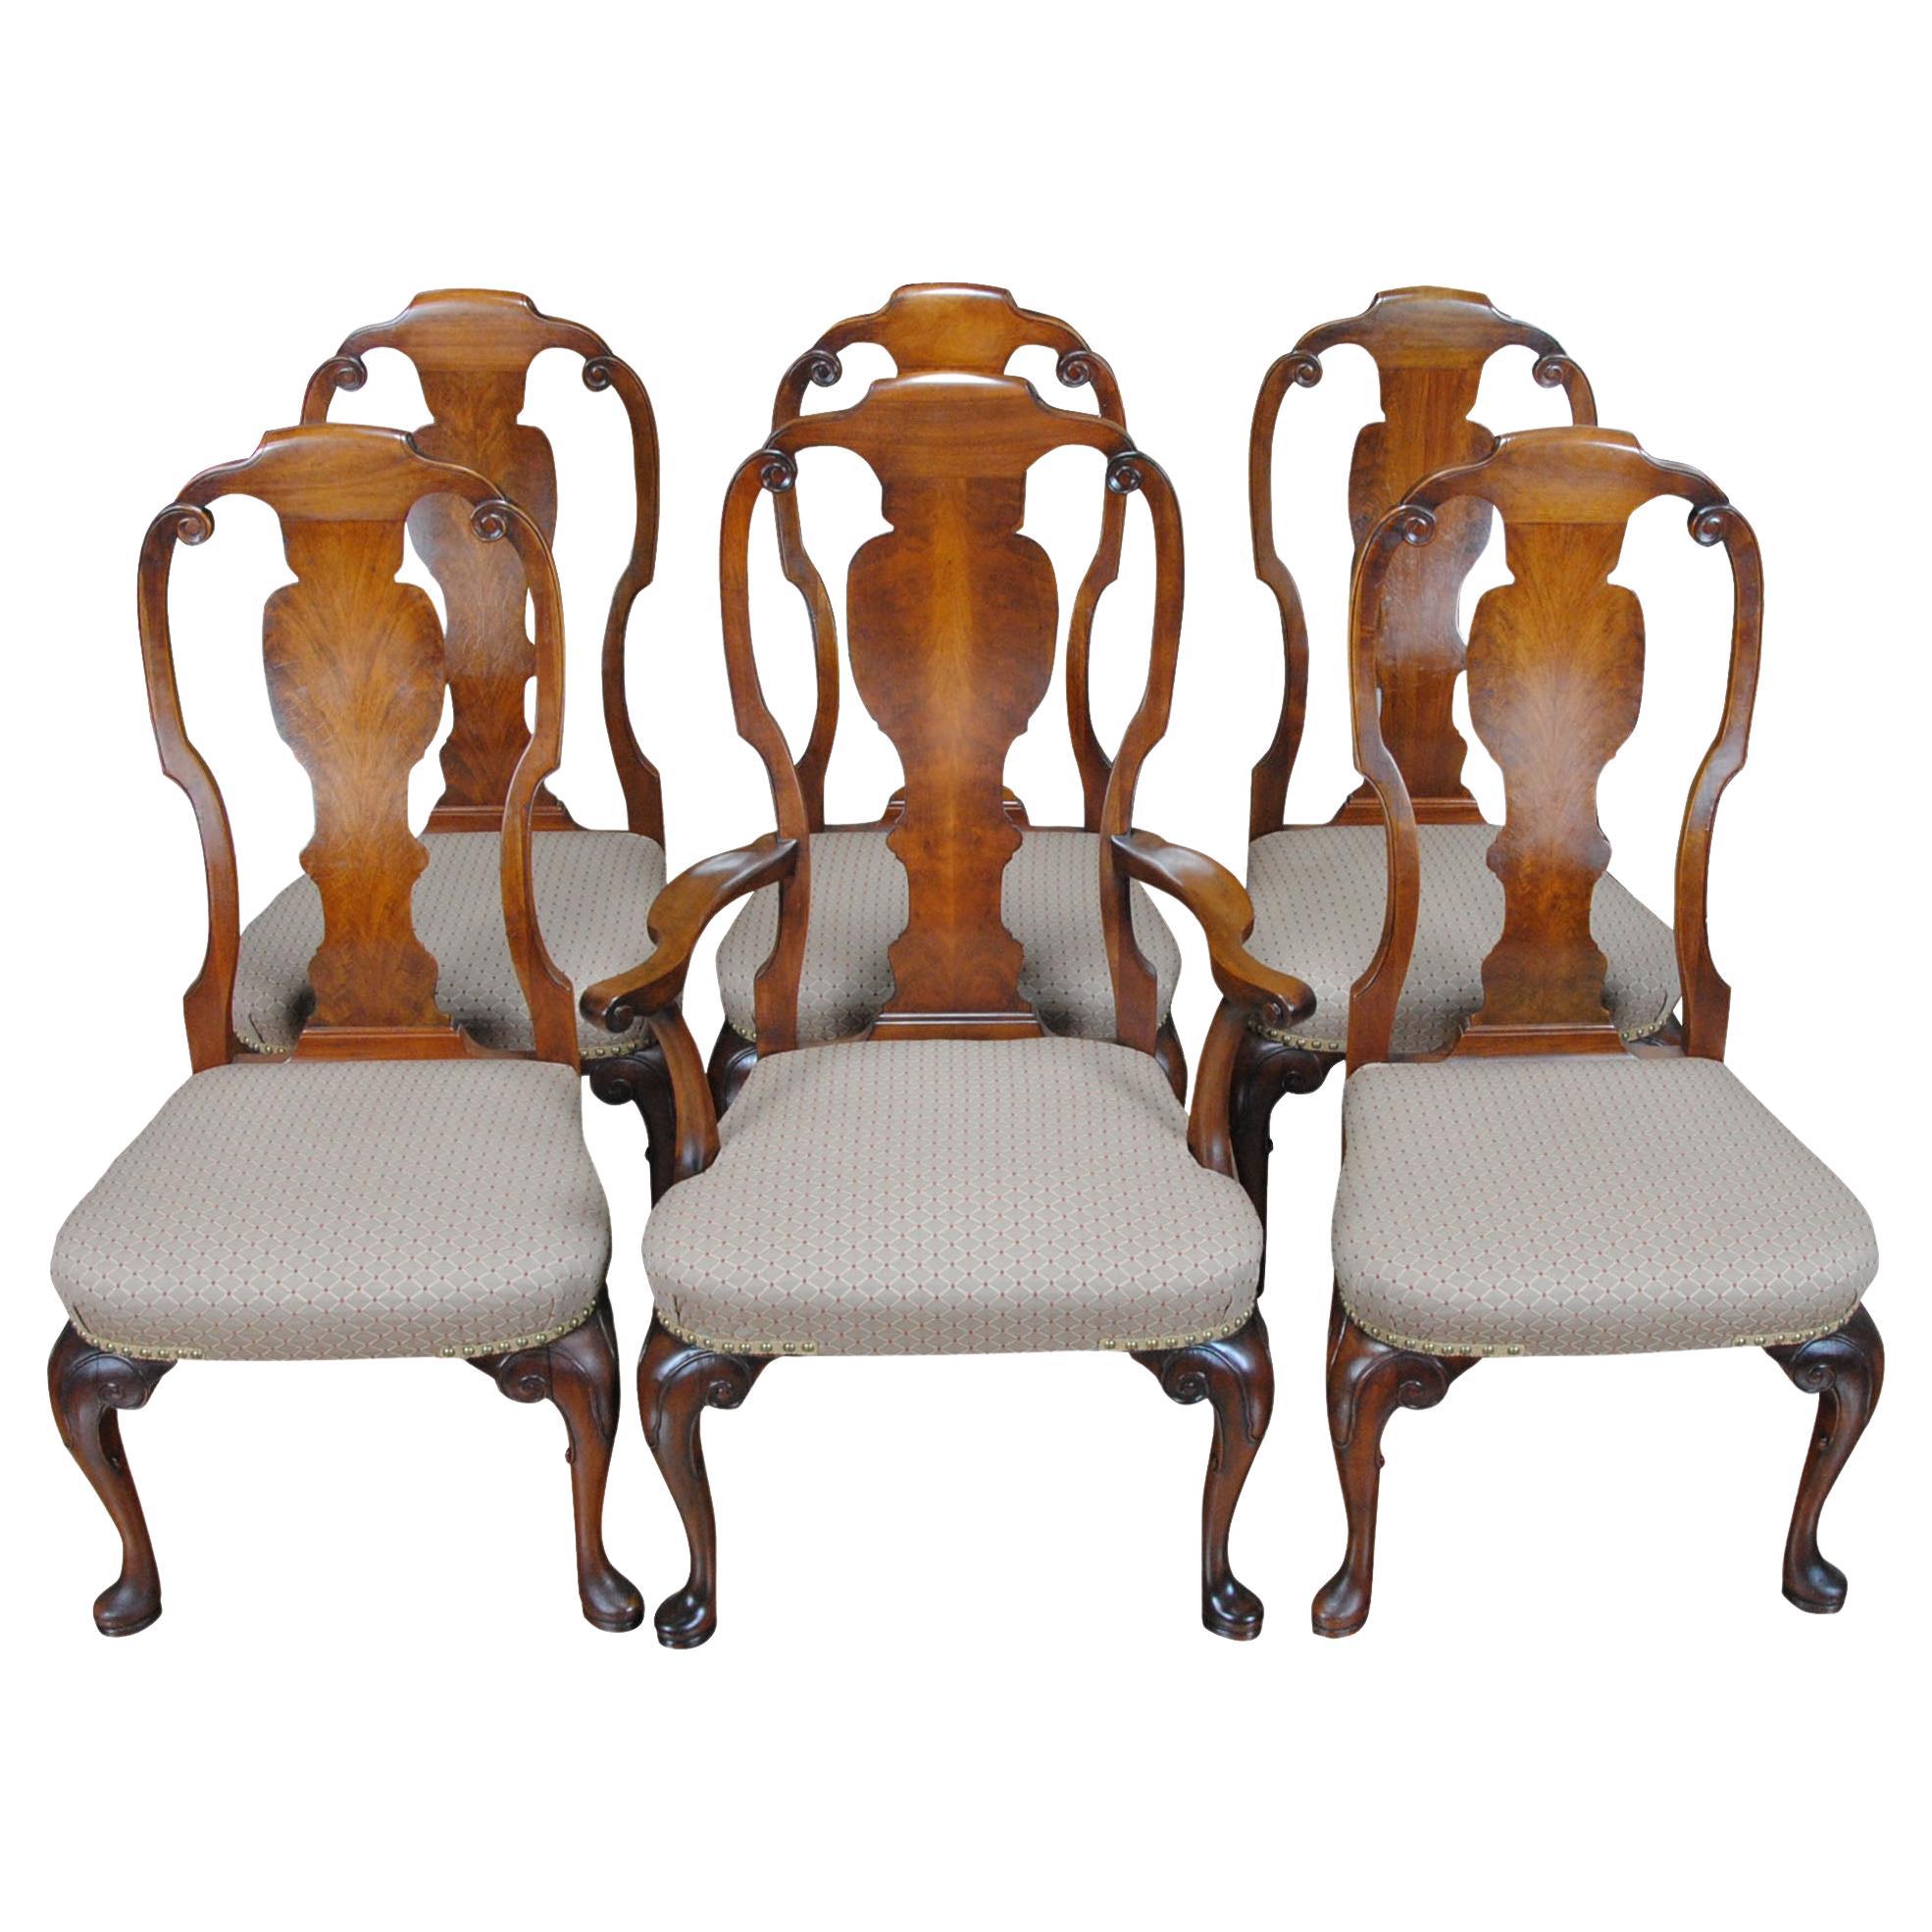 Berkey and Gay Set of 6 Vintage Chairs For Sale